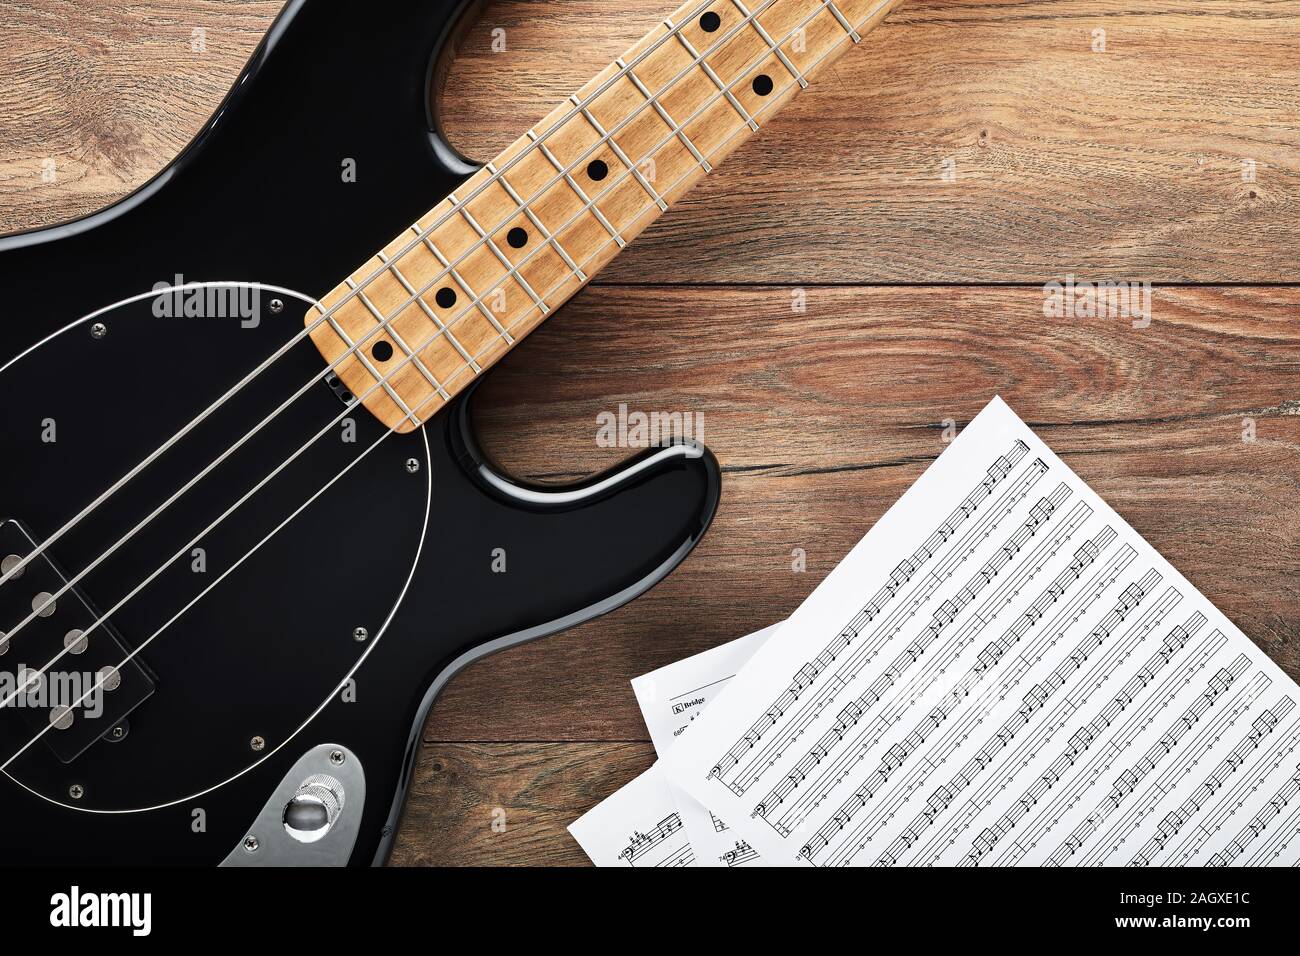 Black bass guitar with headphones and sheet music on wooden table. Music production, composing or practicing. Stock Photo